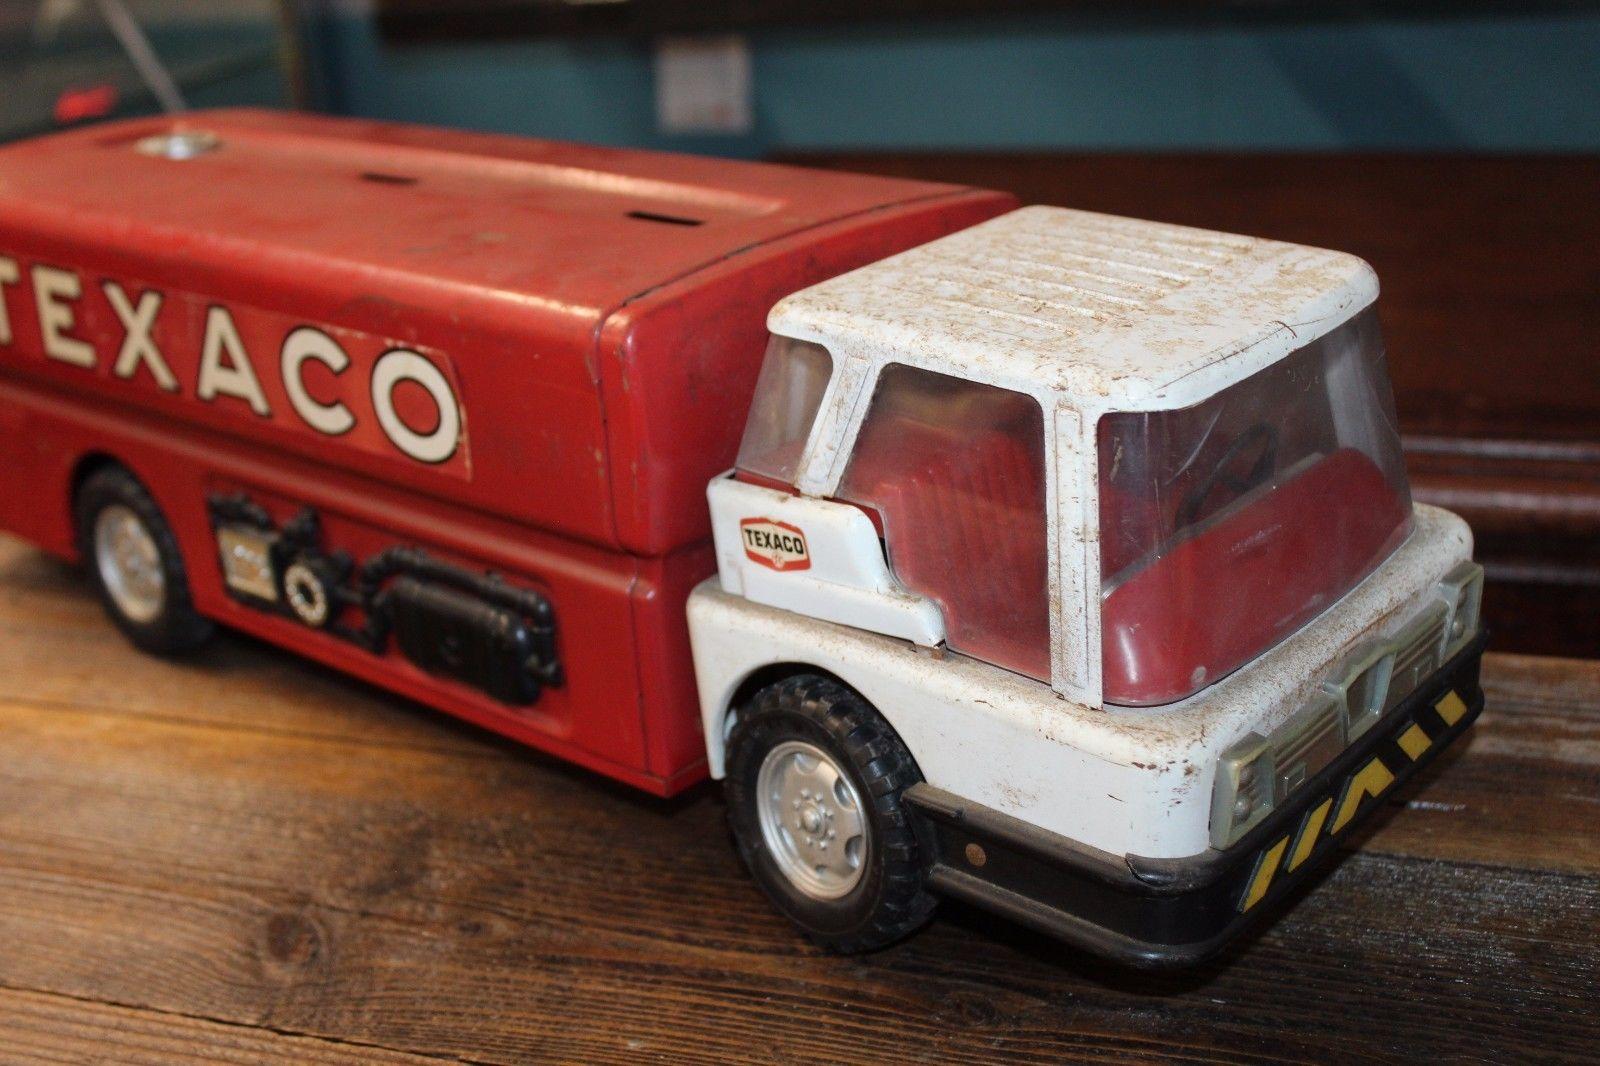 Fun Texaco truck toy from the past!